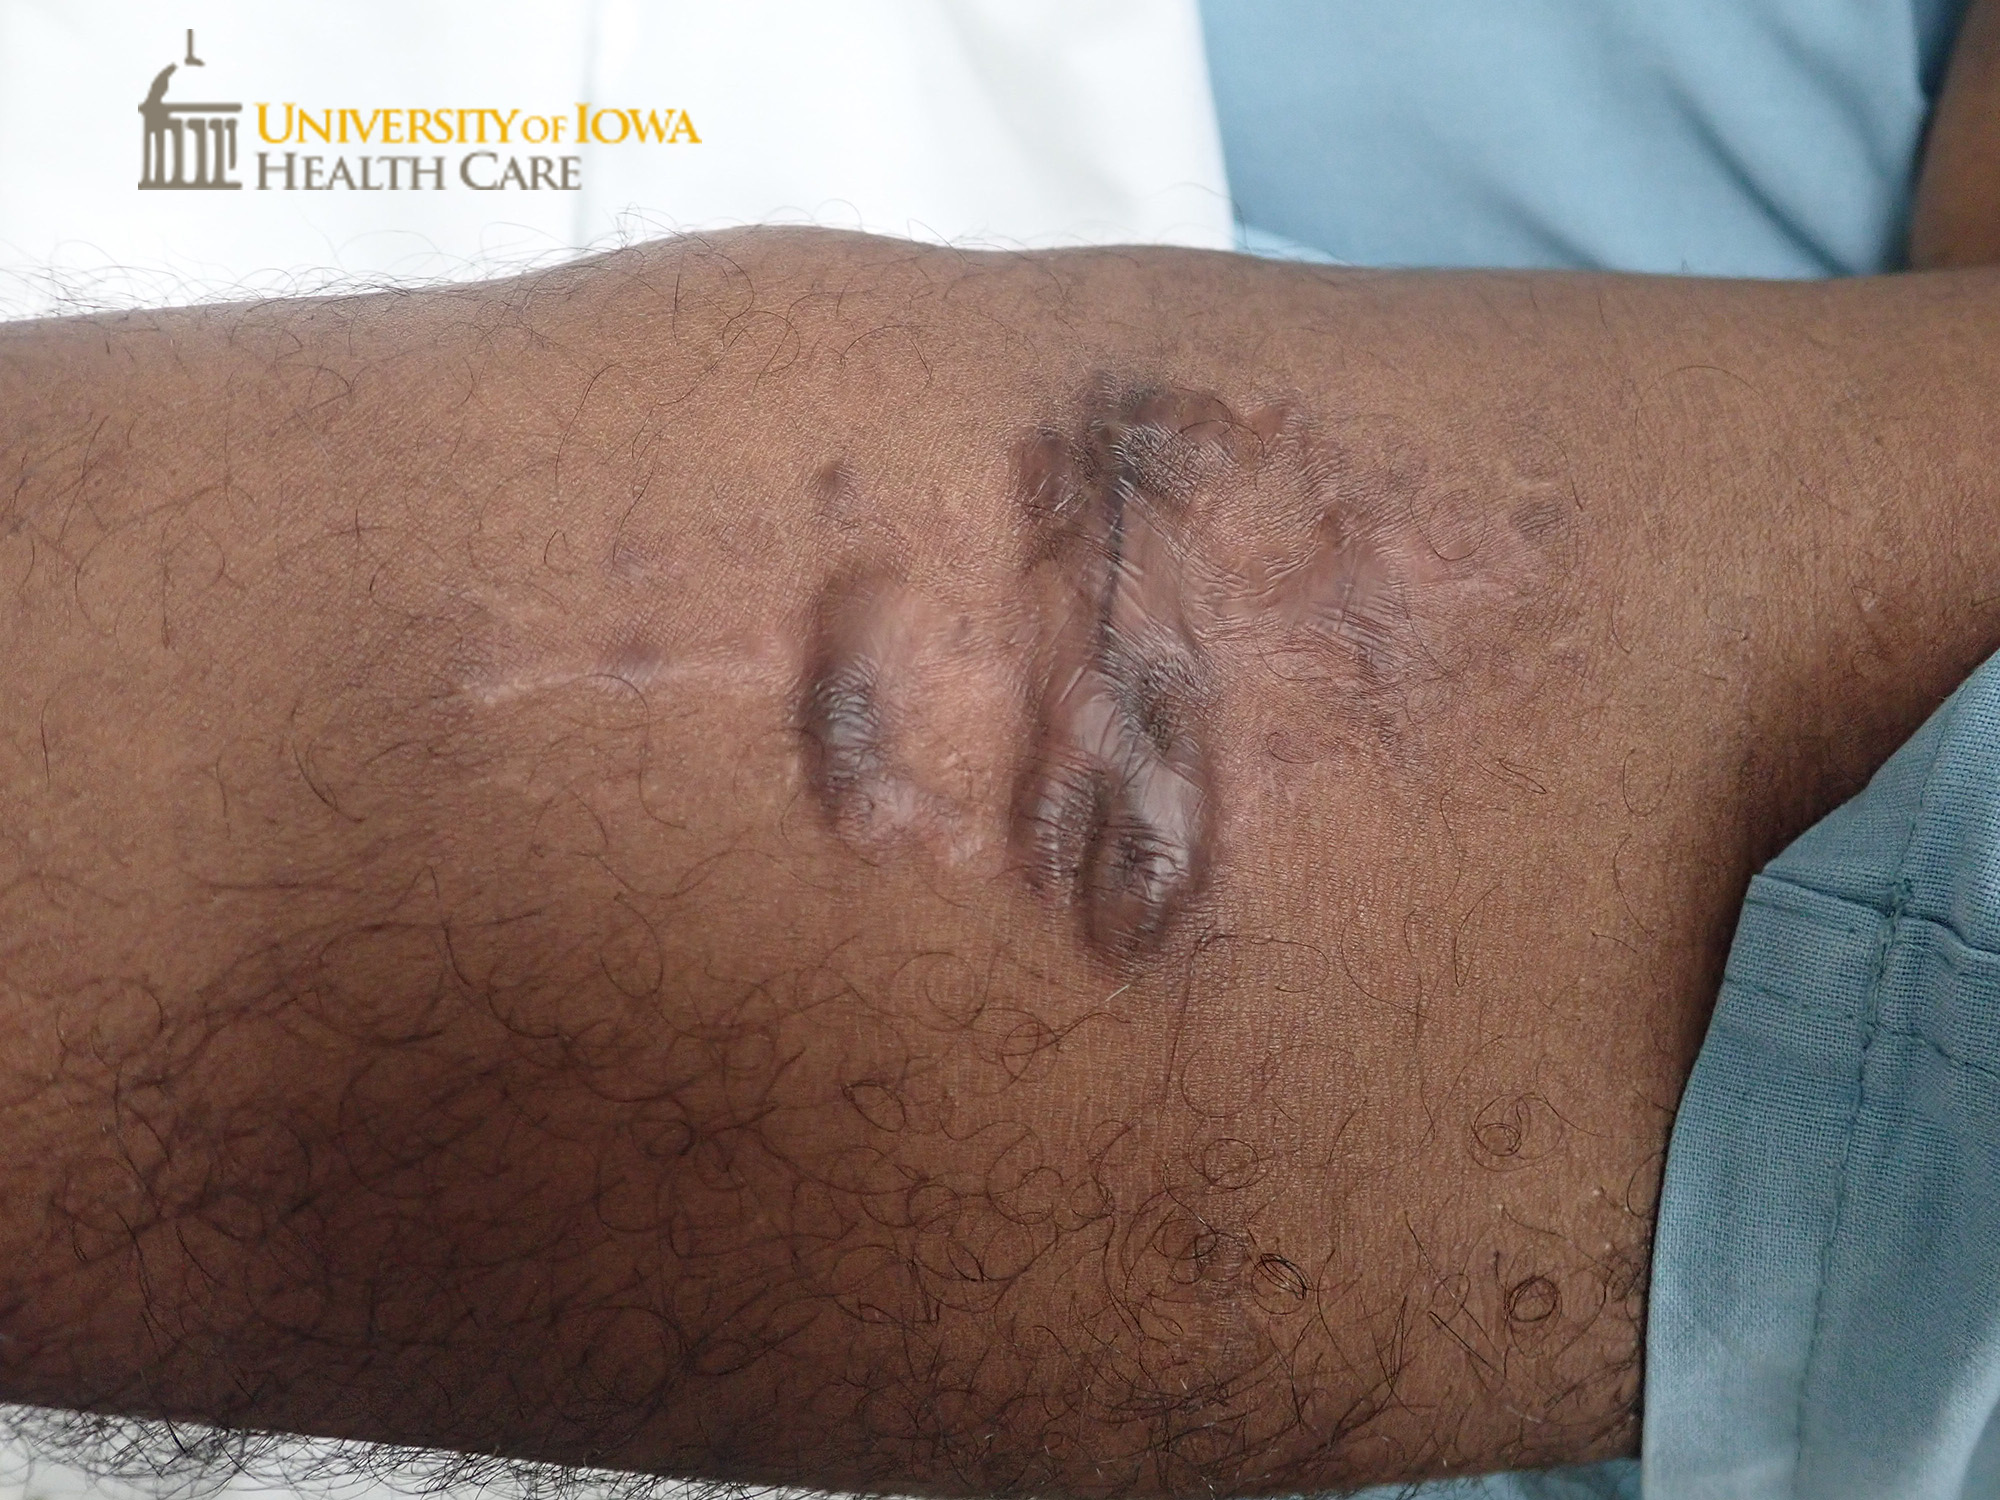 Pink to hyperpigmented linear plaques at site of surgical incision. (click images for higher resolution).